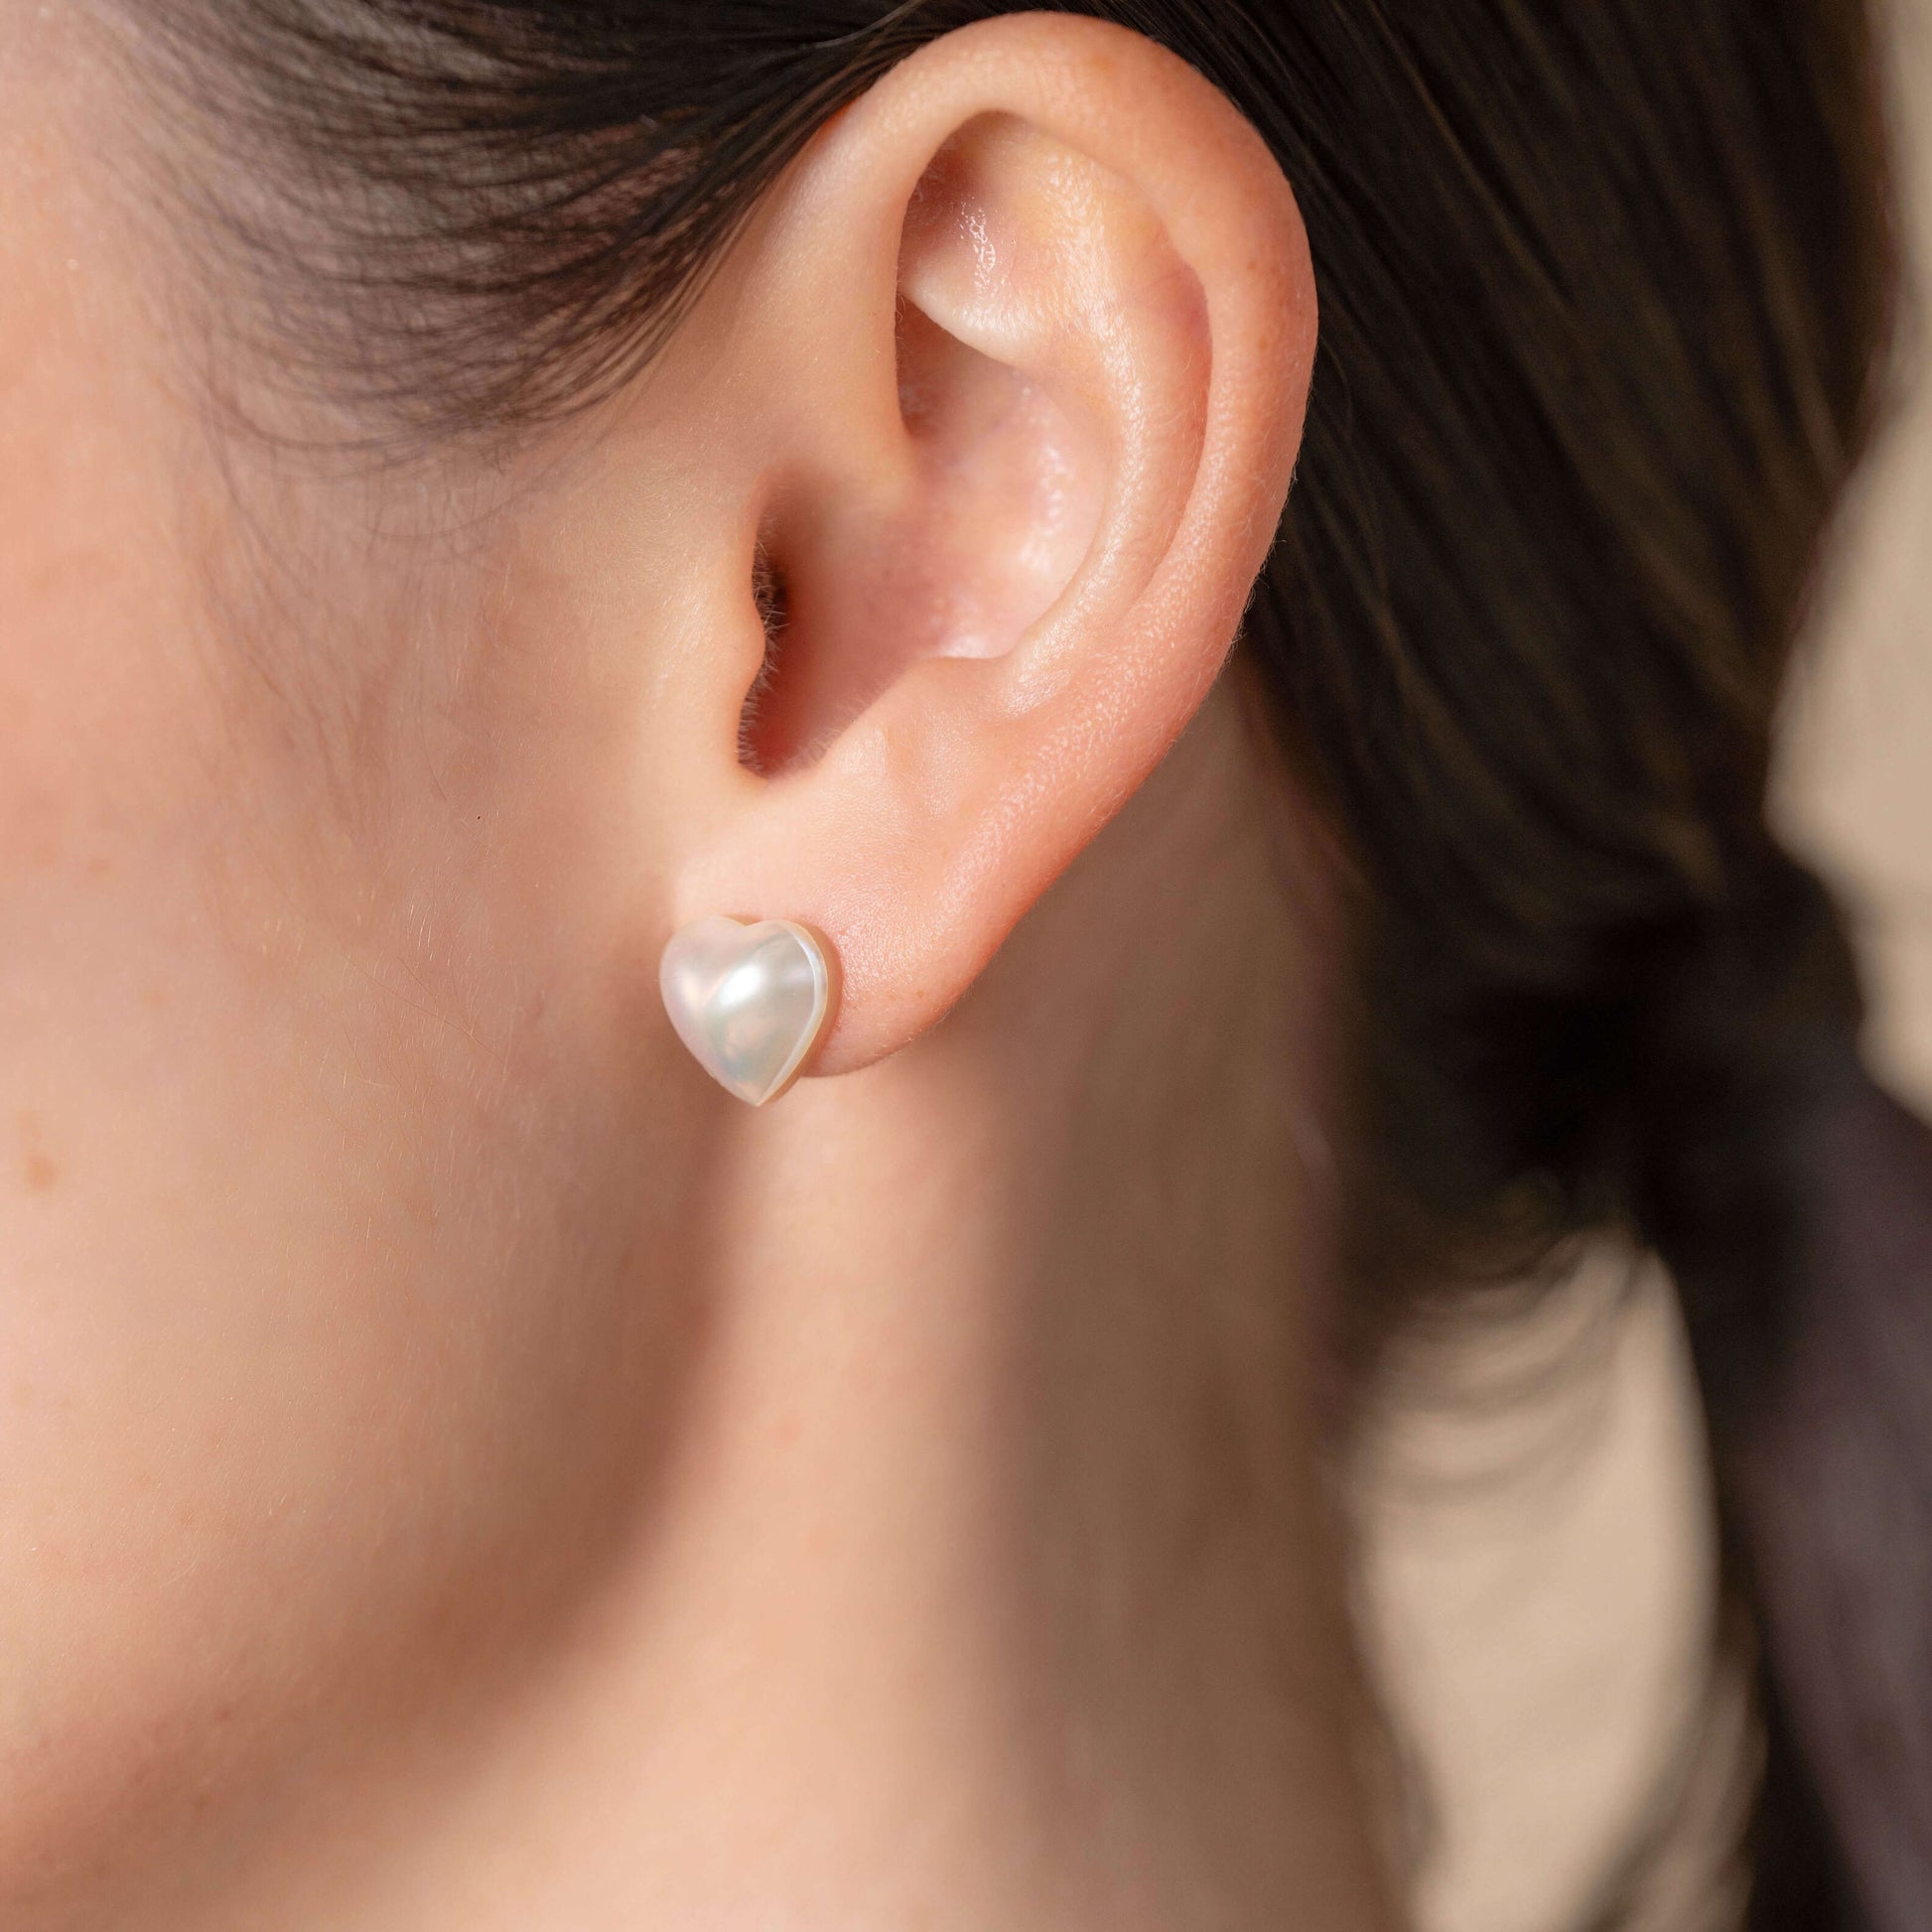 Elevate your look with Heart Pearl Stud Piercing earrings on a stylish woman.